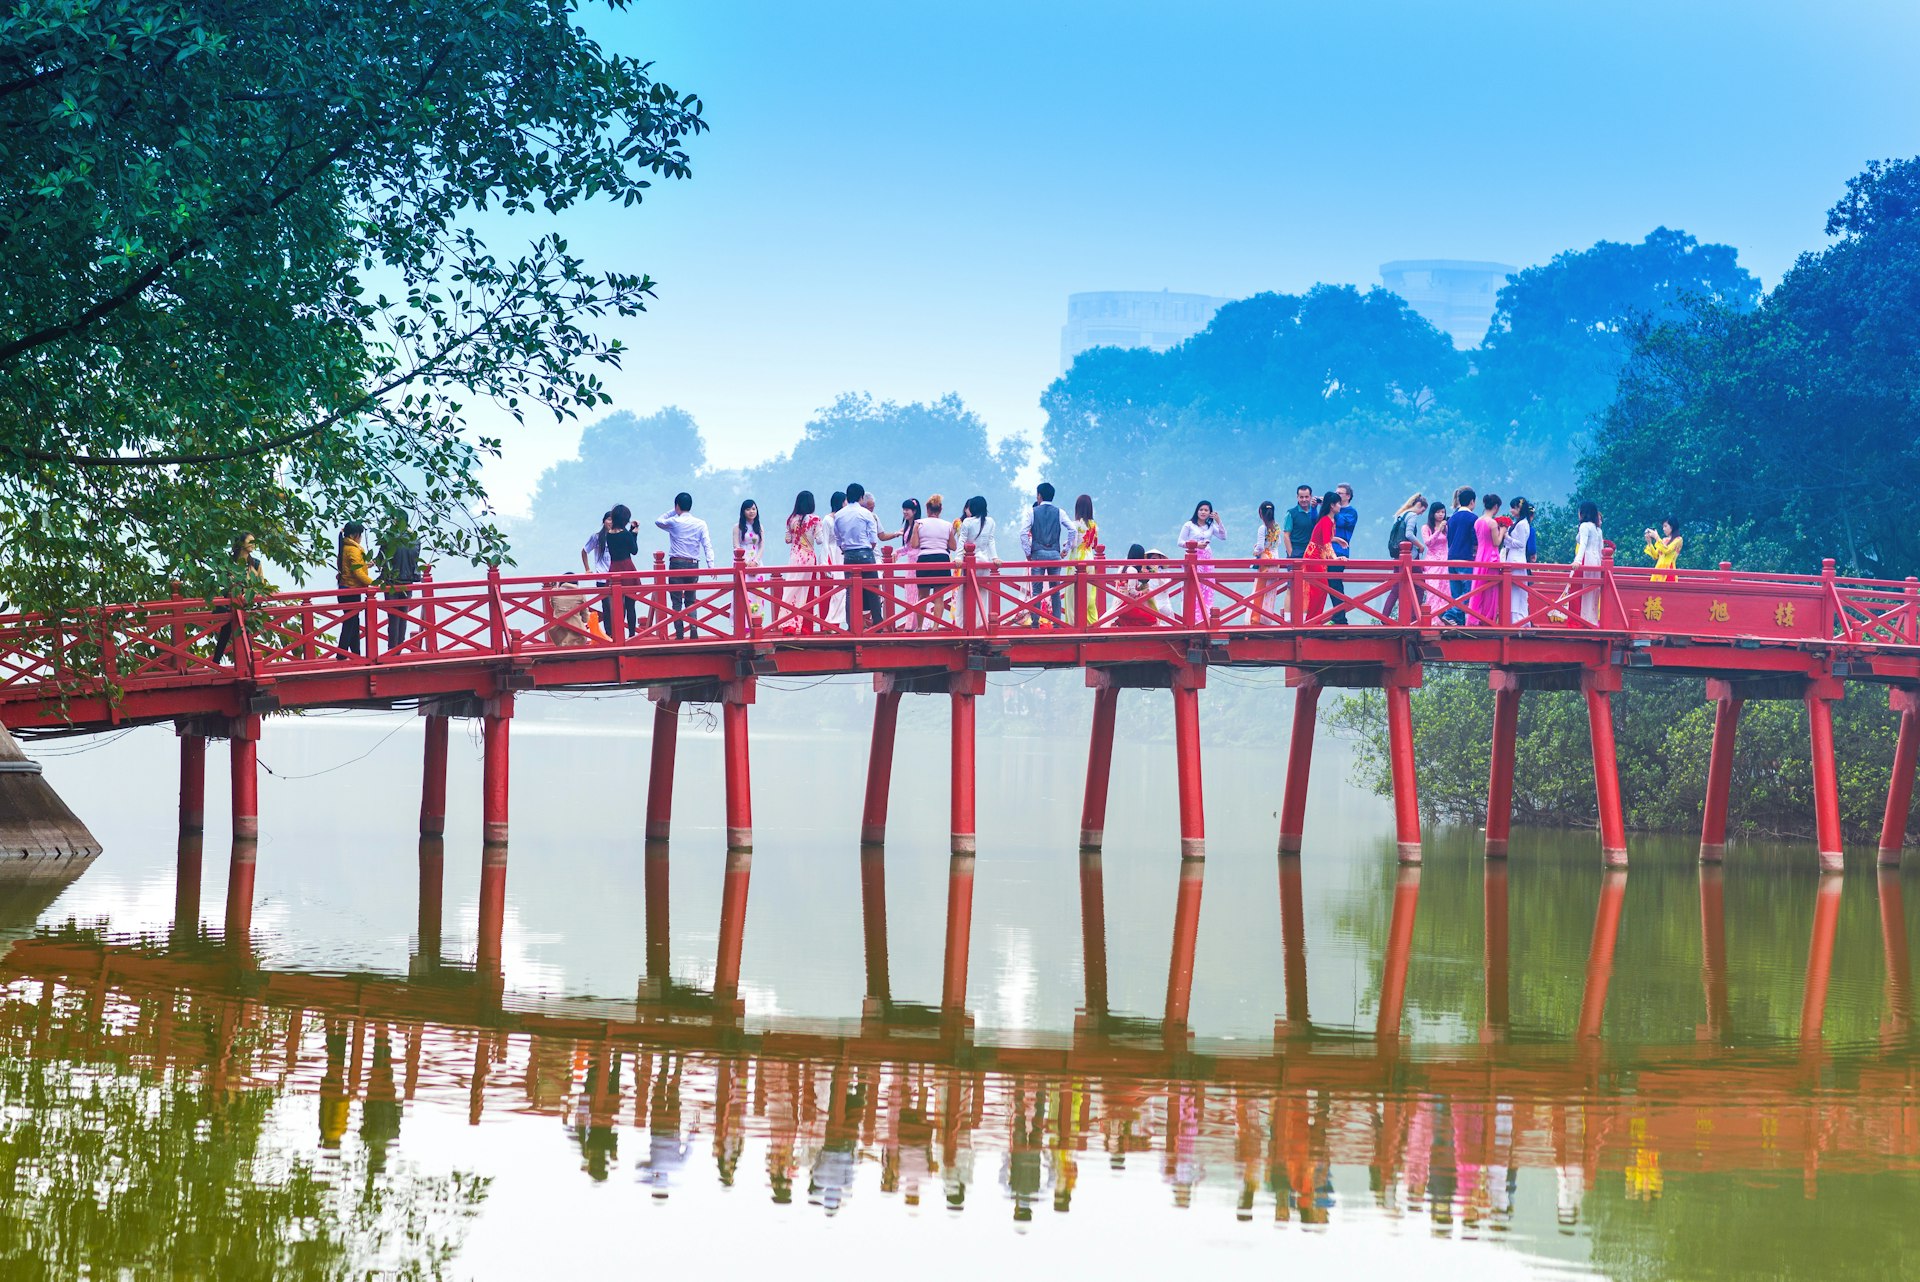 uc Bridge over the Hoan Kiem Lake .The wooden red-painted bridge connects the shore and the Jade Island on which Ngoc Son Temple